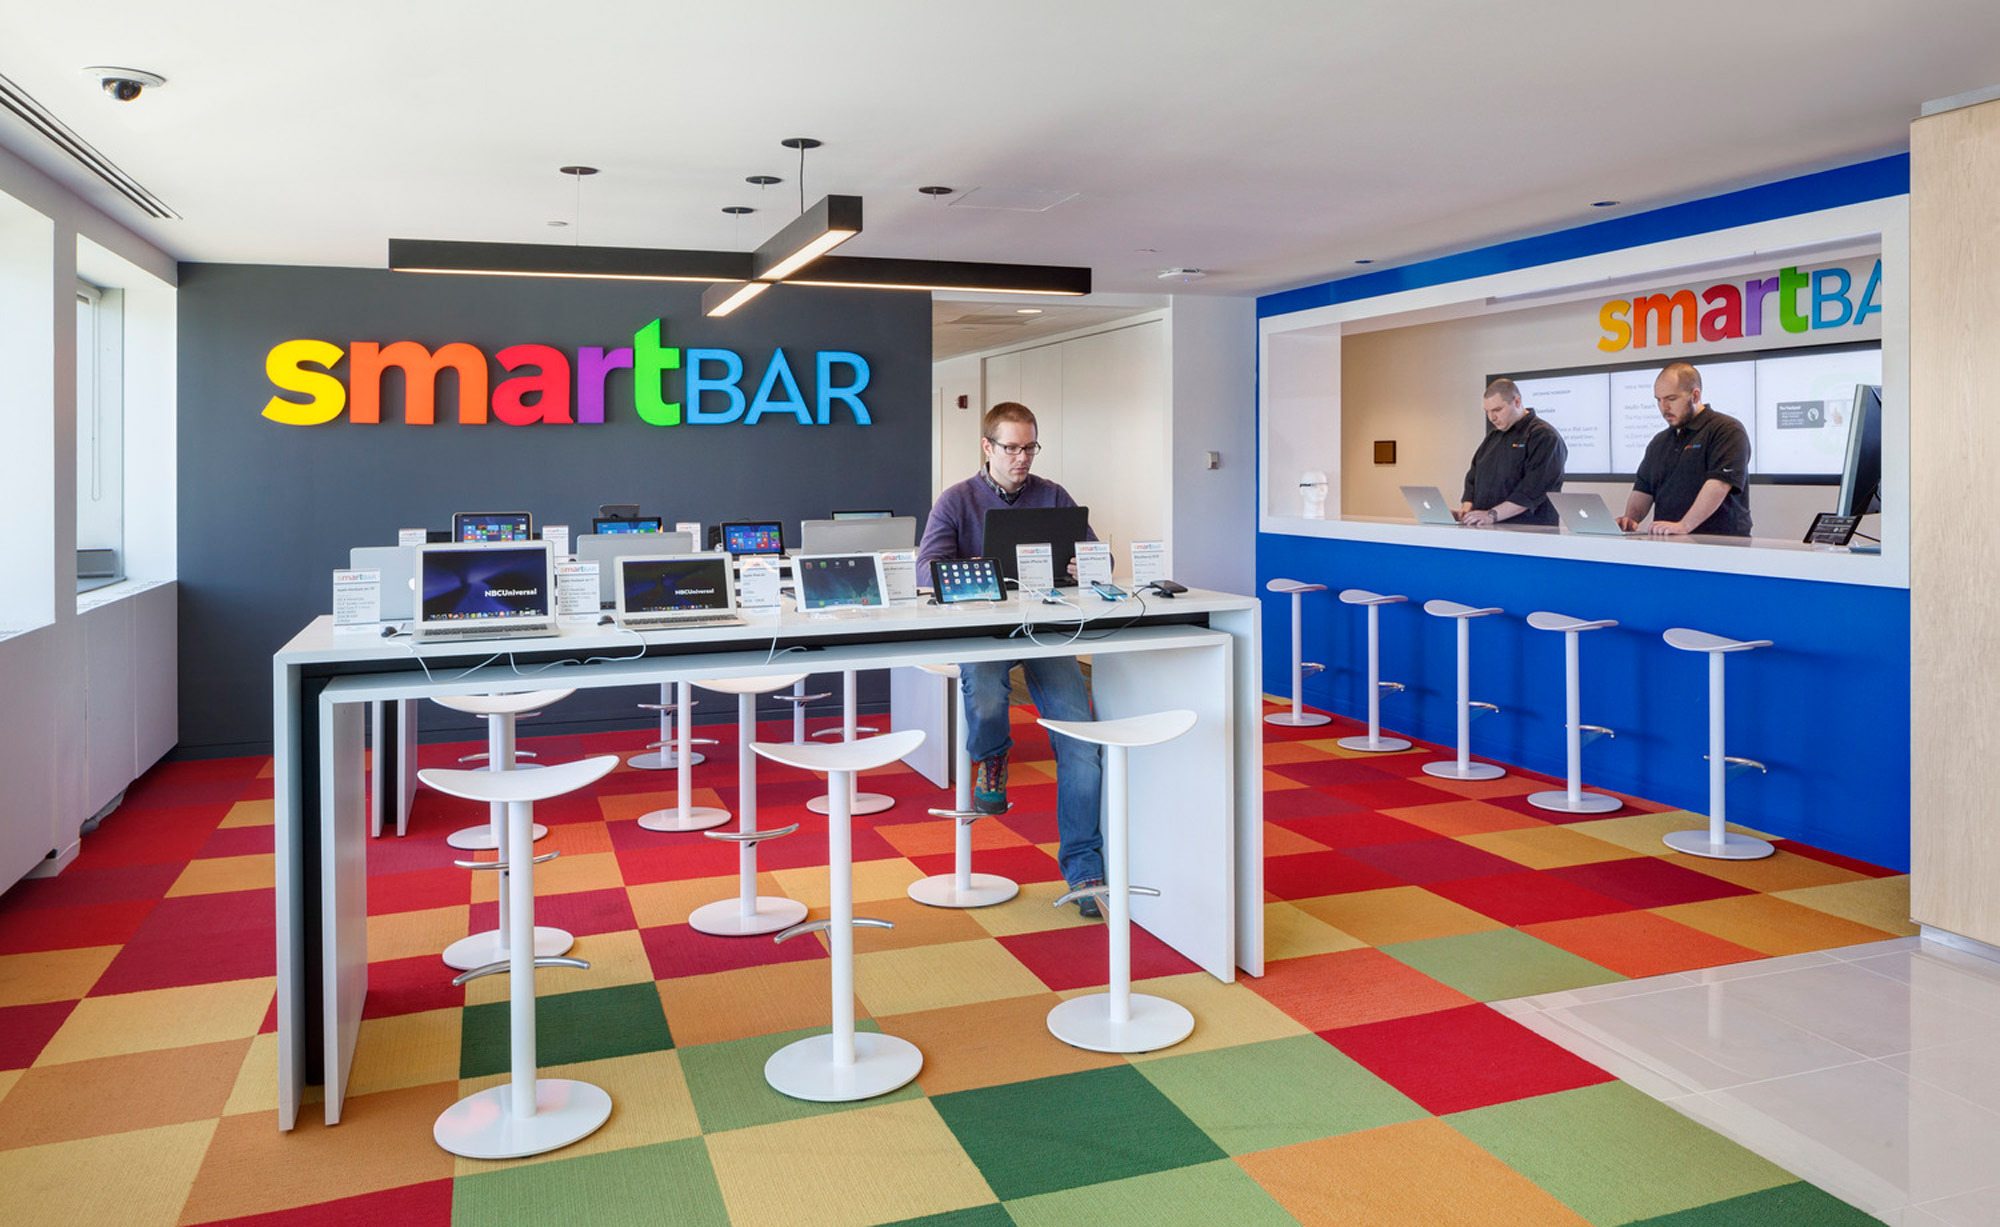 Modern office break area featuring a vibrant multicolored geometric-patterned carpet, white standing tables with bar stools, and minimalistic decor against an accent wall with 'smartBAR' branding. The space is designed for collaboration with an informal, energetic atmosphere.